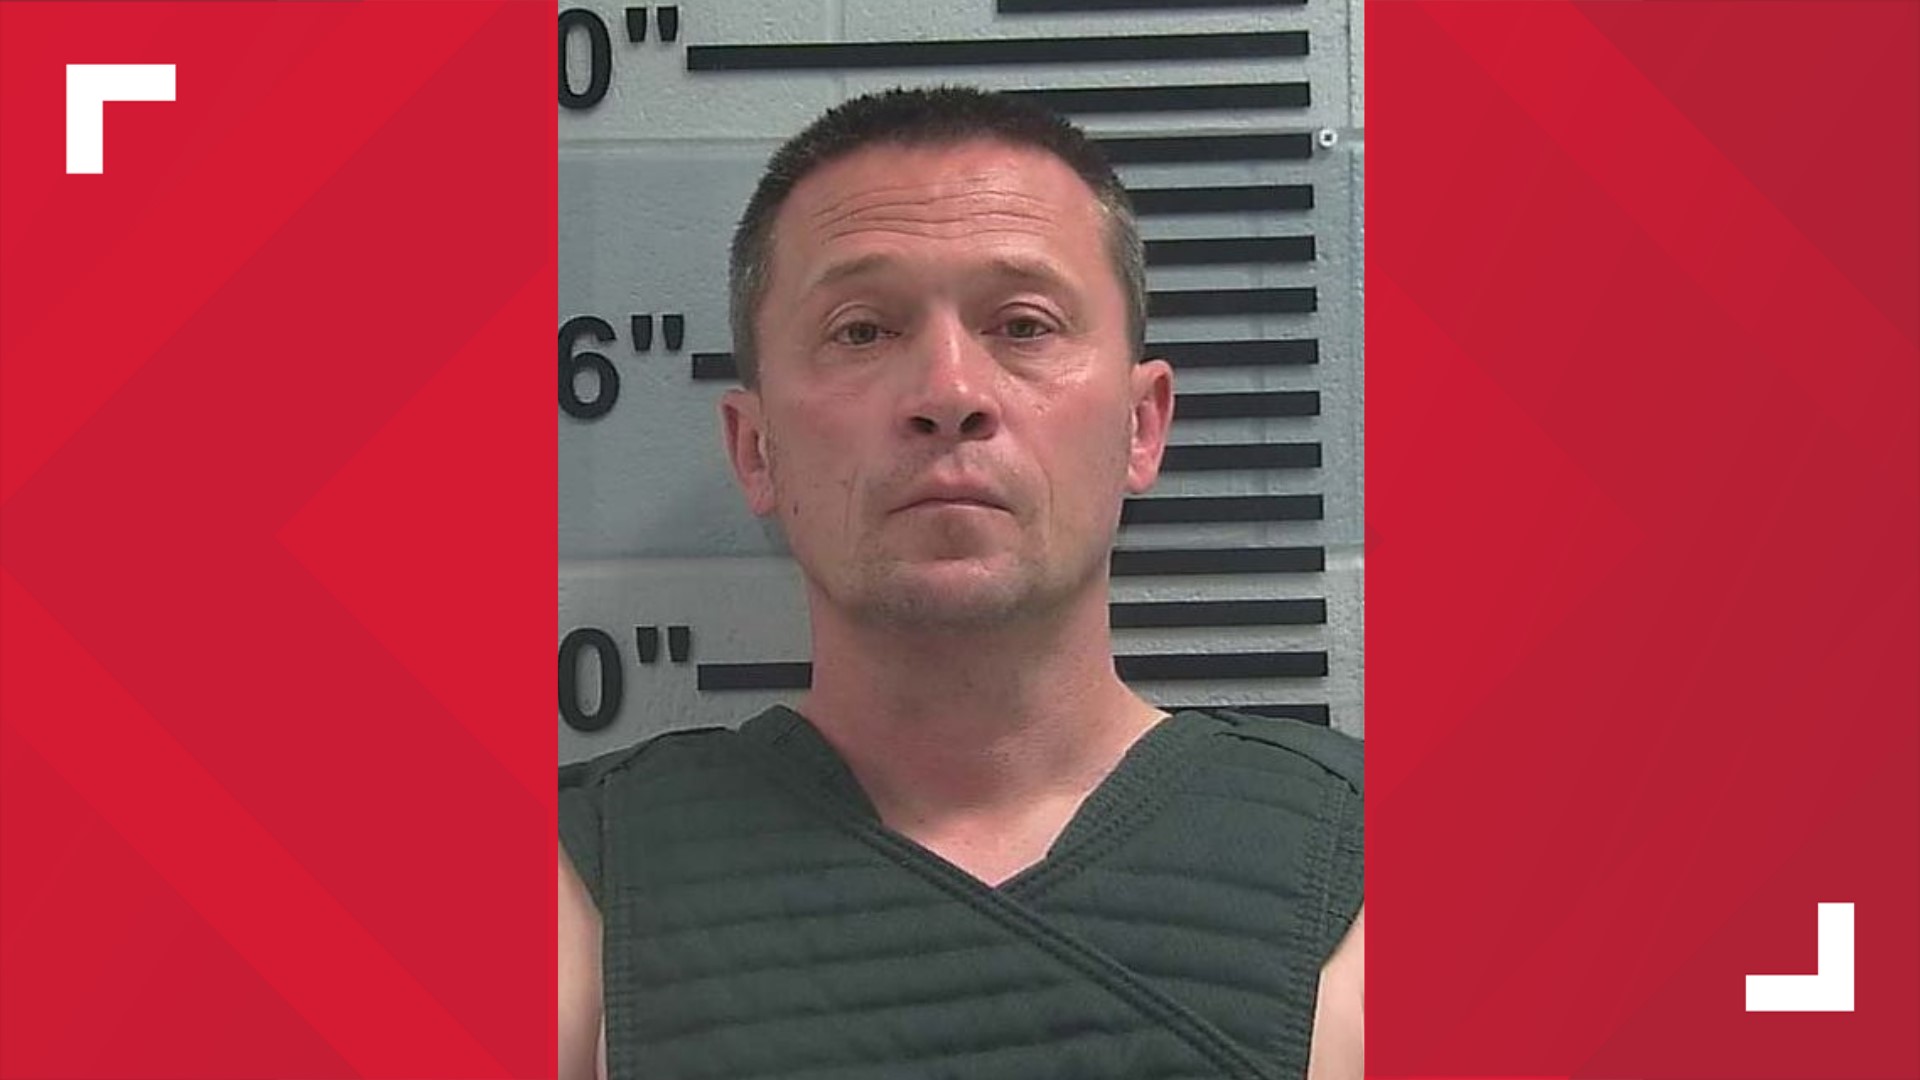 Chad Little, 45, has been placed on leave after he was accused of engaging in sexual conduct with someone enrolled at Bloom-Carroll schools.